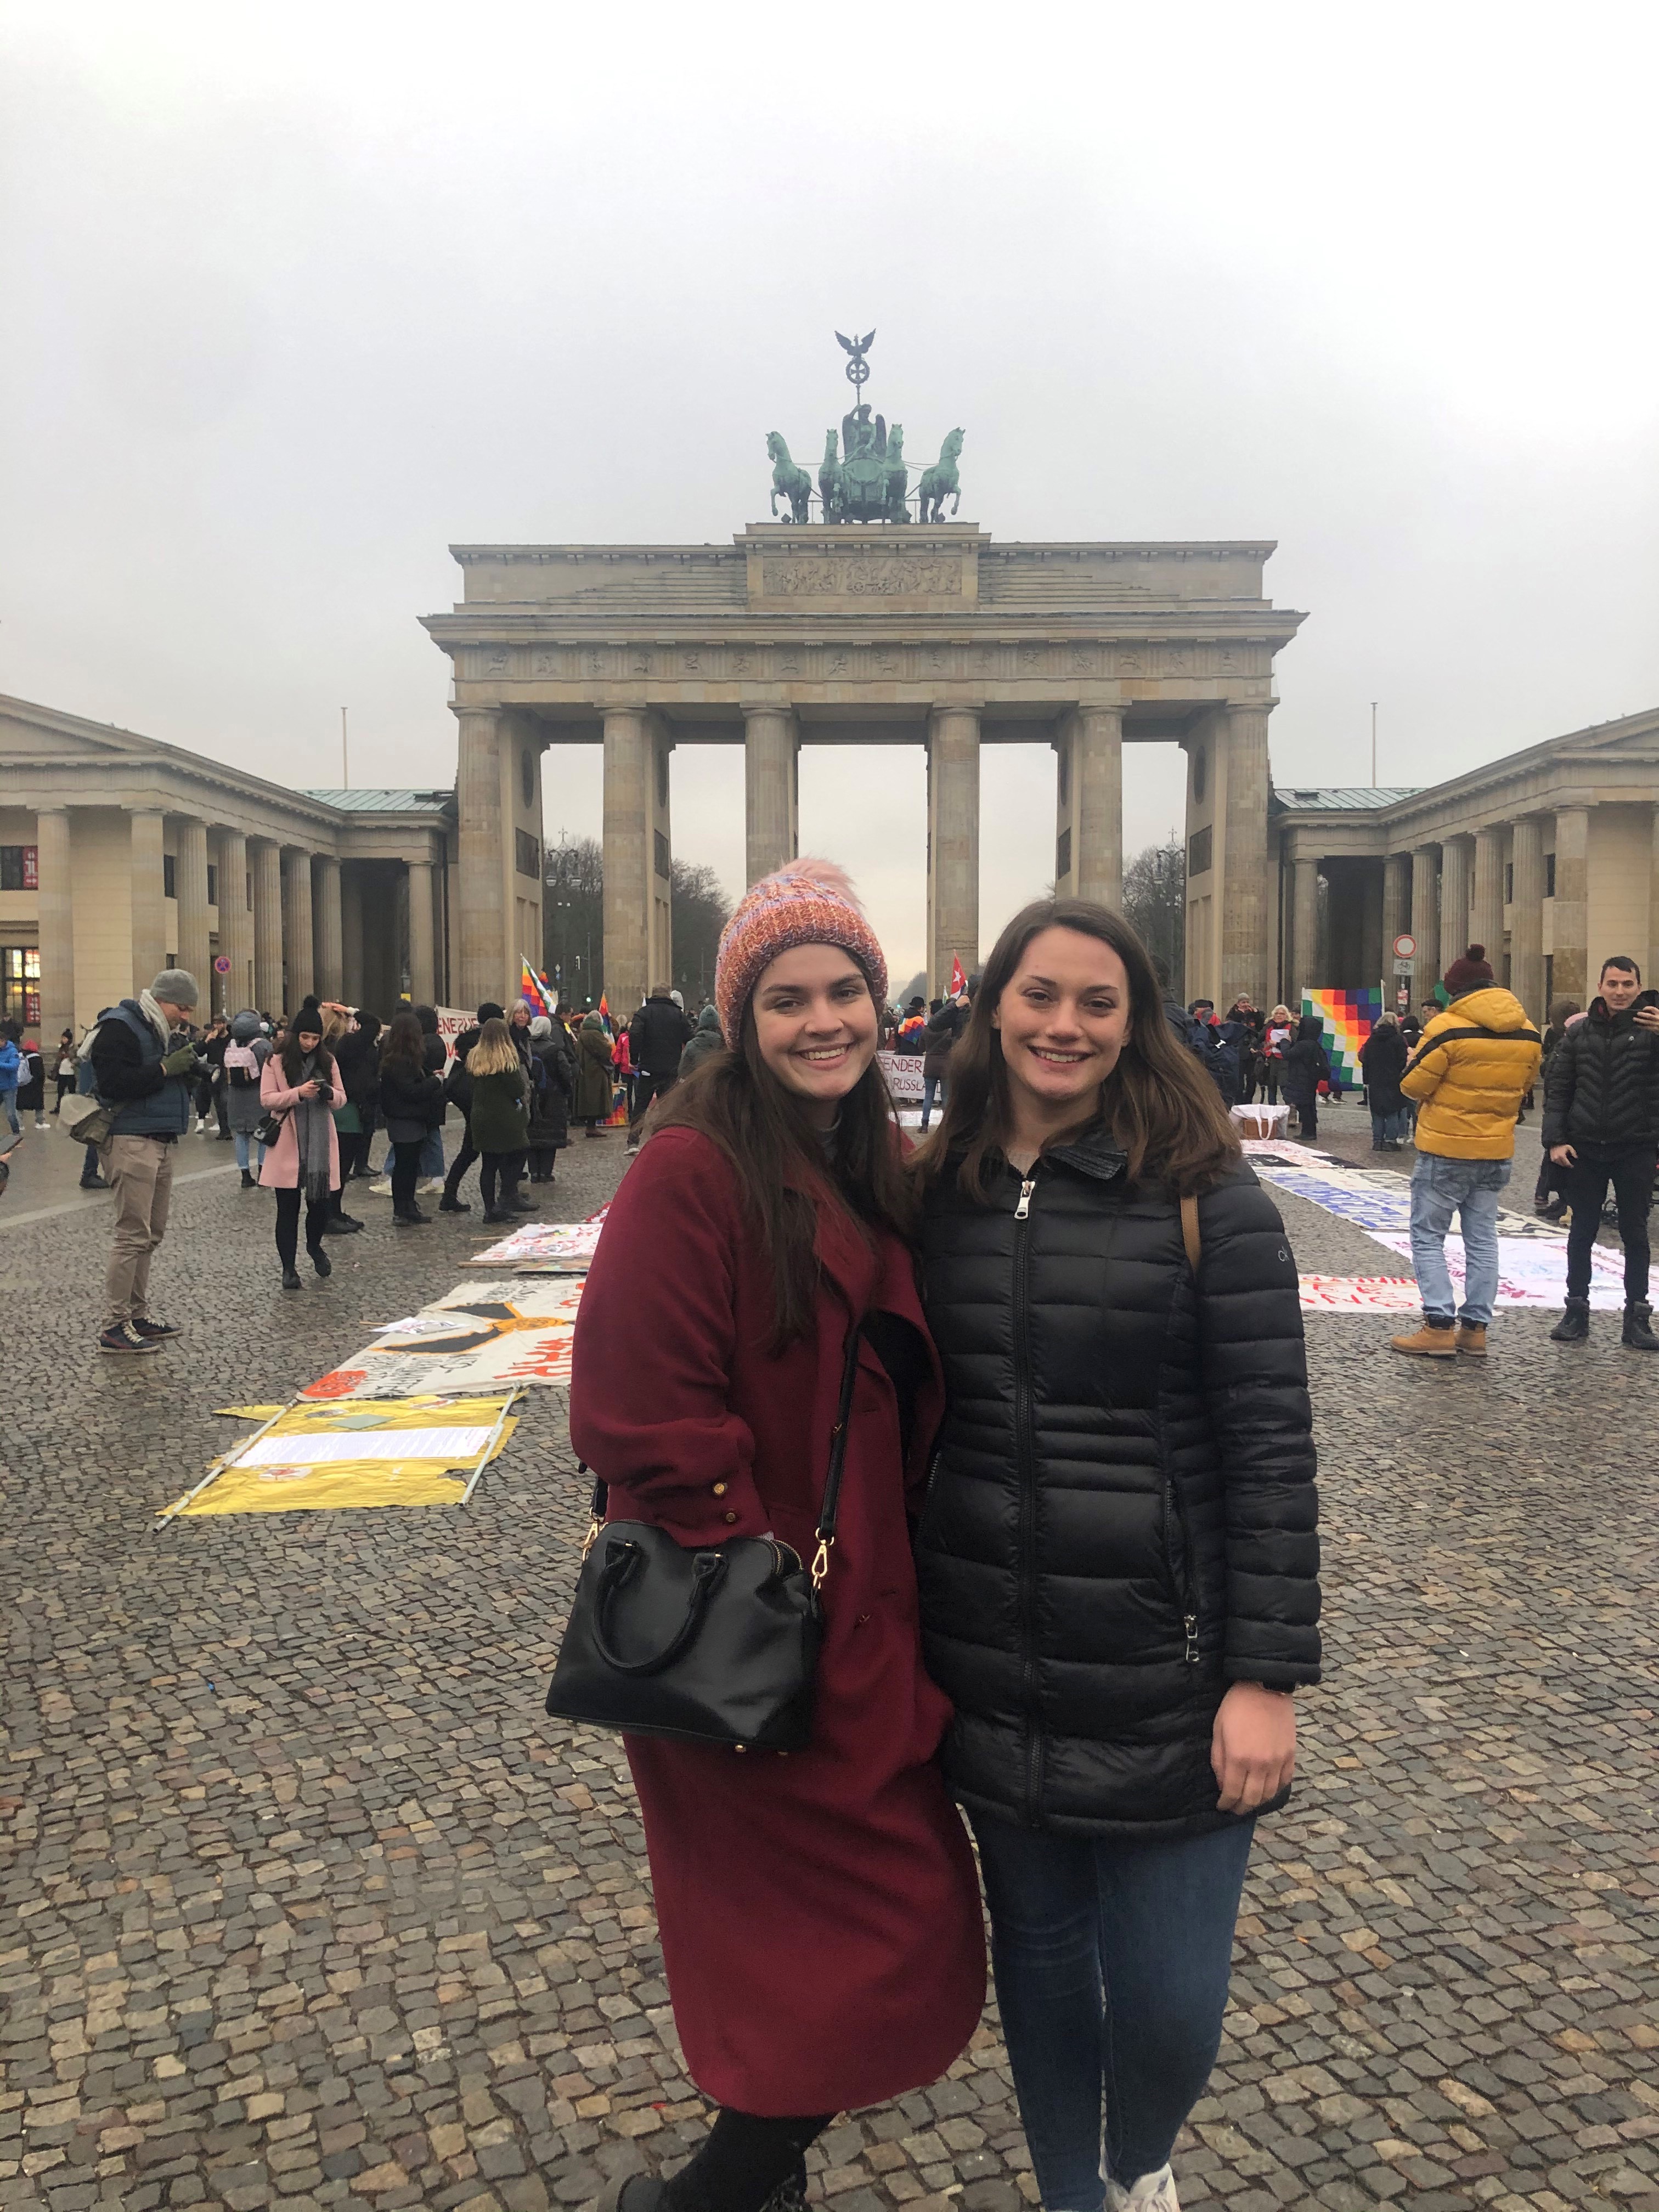 Two students in front of a monument